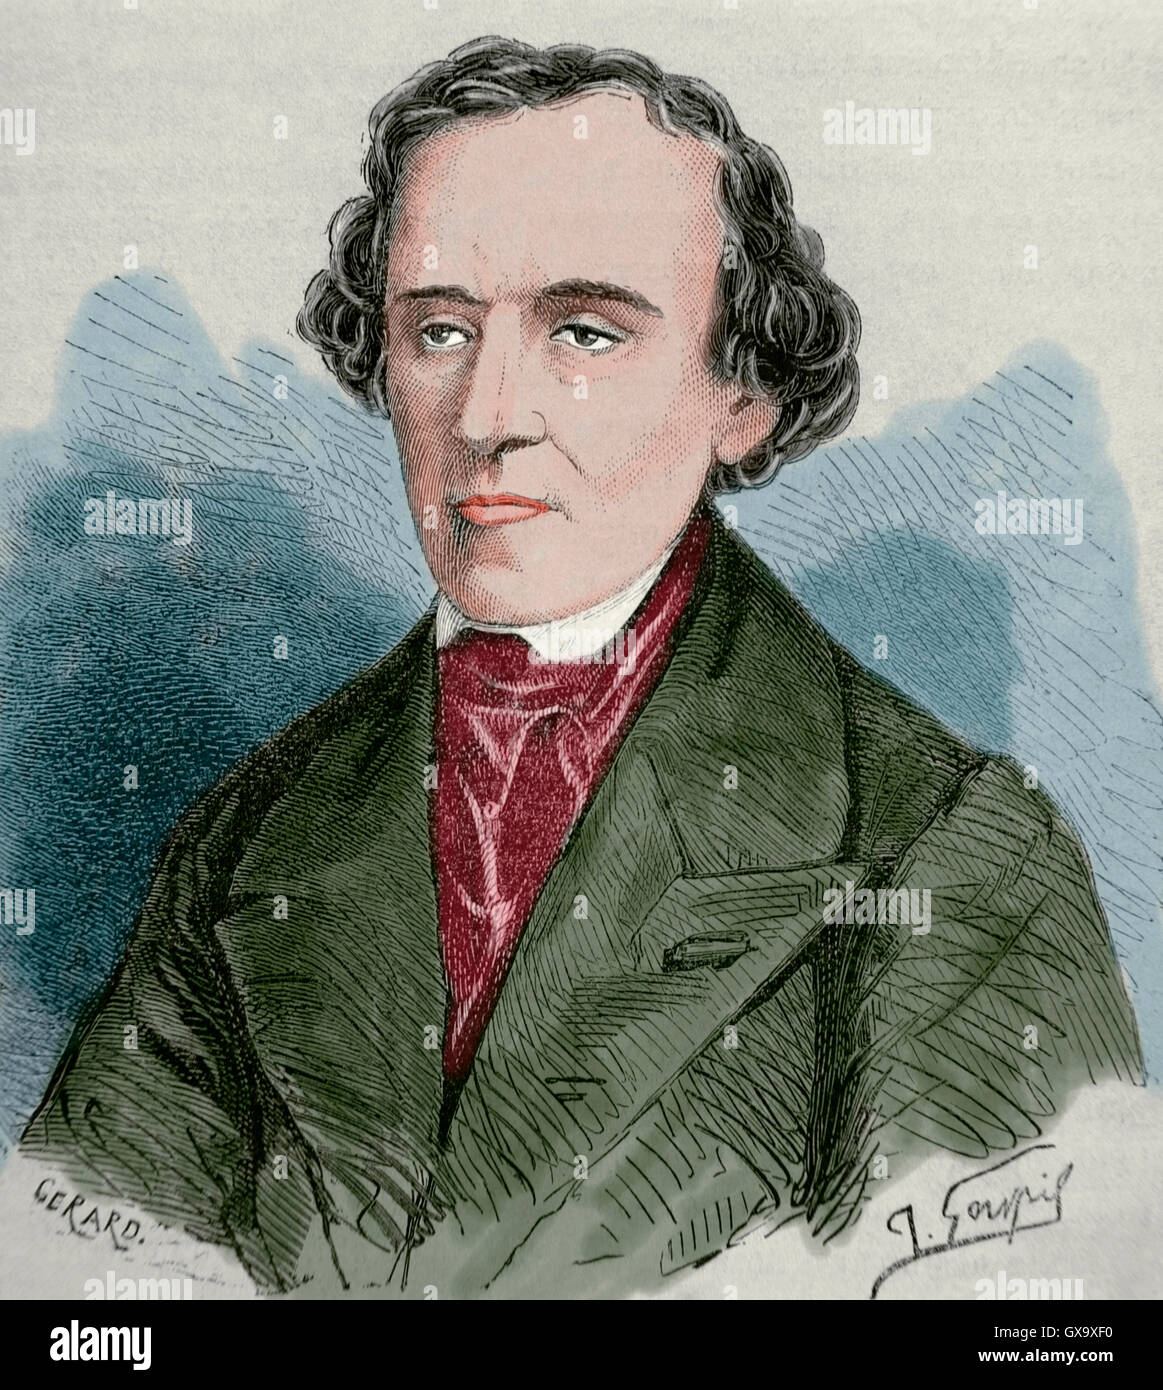 Giacomo Meyerbeer (1791-1864). German opera composer. Portrait. Engraving by Gerard. 19th century. Colored. Stock Photo